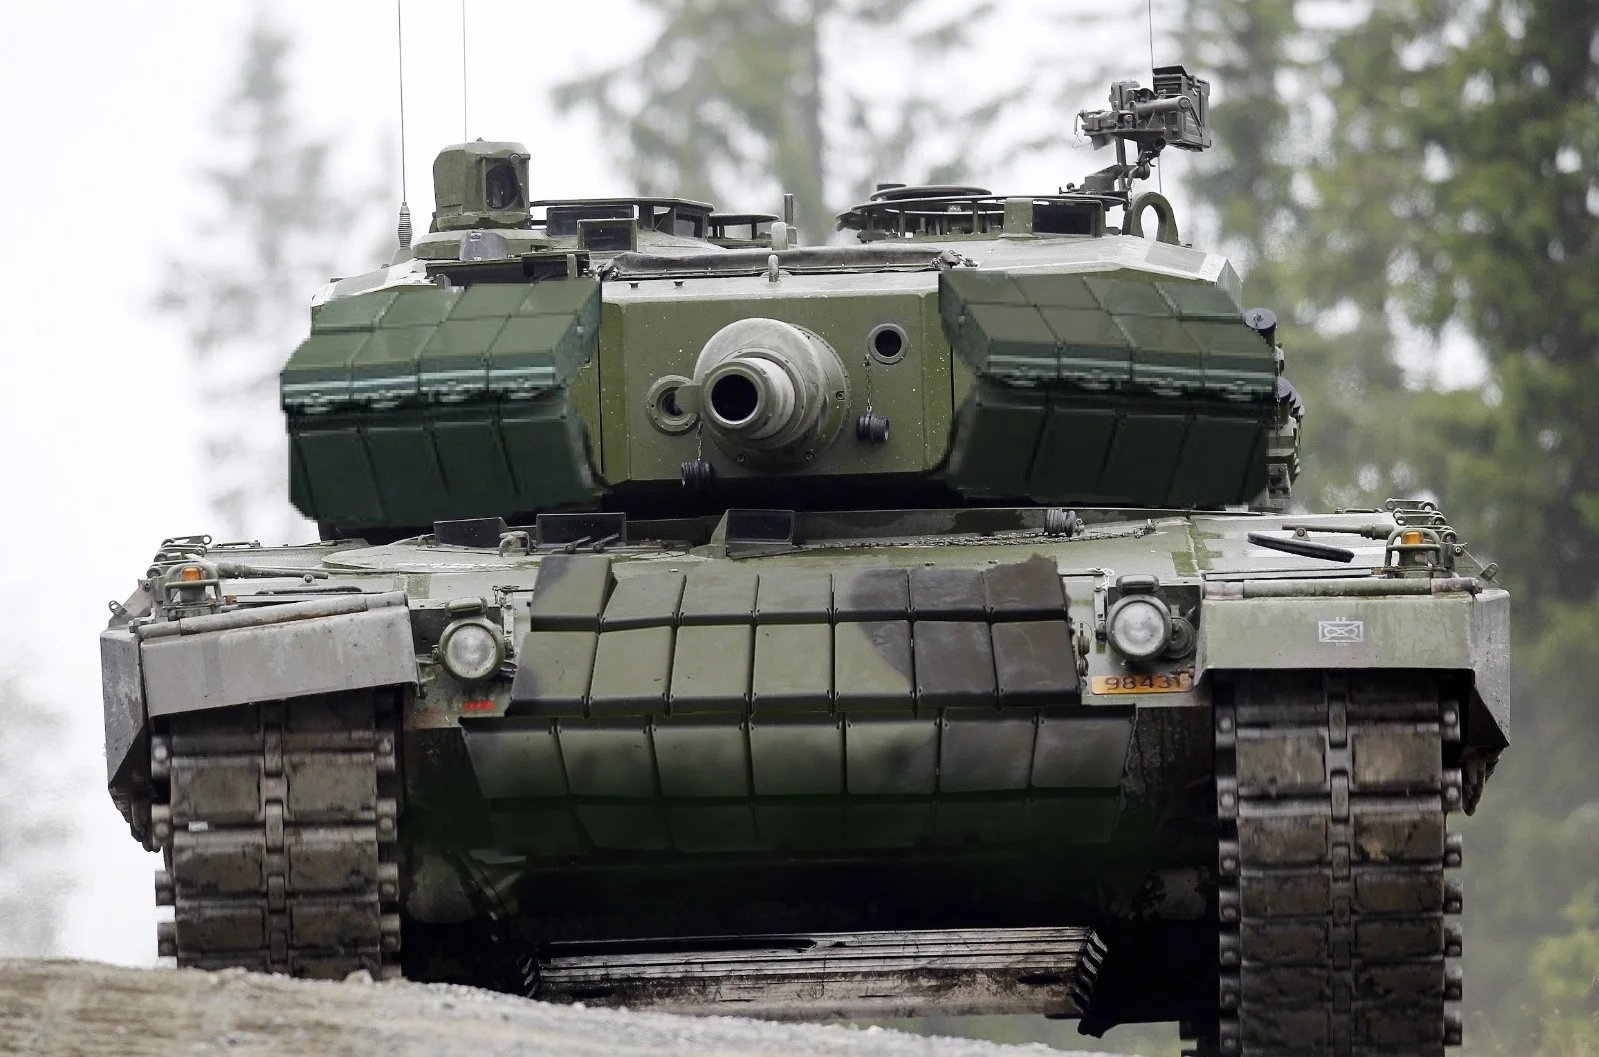 Leopard 2a4 With Contact R/UkraineWarVideoReport, 57% OFF